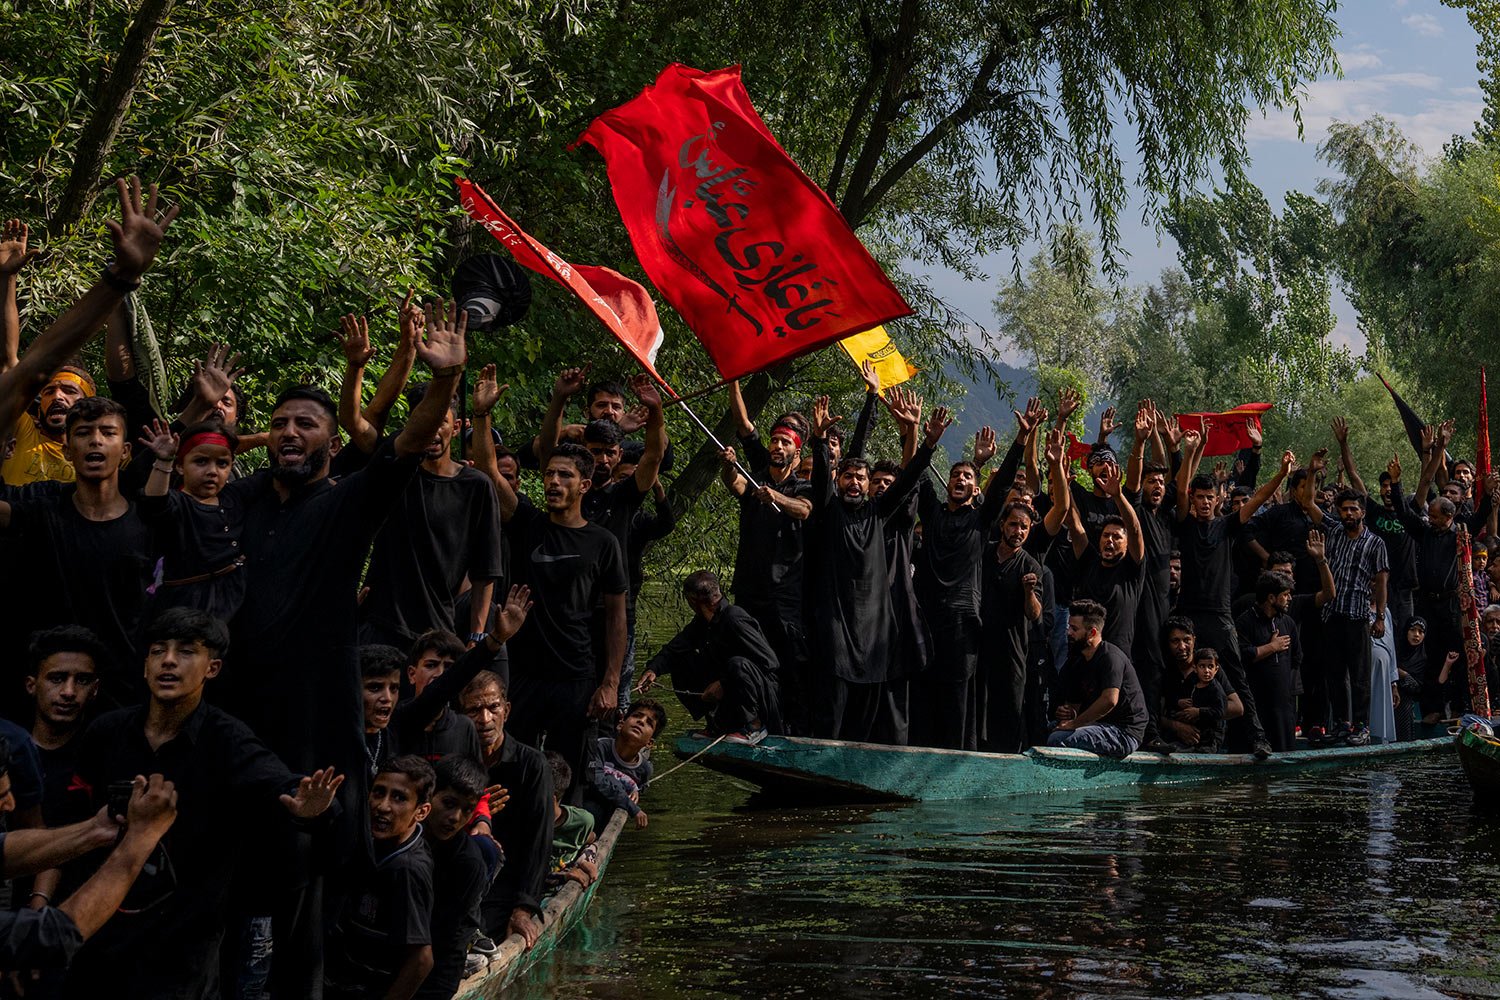  Kashmiri Shiite Muslims shout religious slogans as they participate in a Muharram procession on wooden boats in the interiors of Dal lake, outskirts of Srinagar, Indian controlled Kashmir, Monday, Aug. 8, 2022.  (AP Photo/ Dar Yasin) 